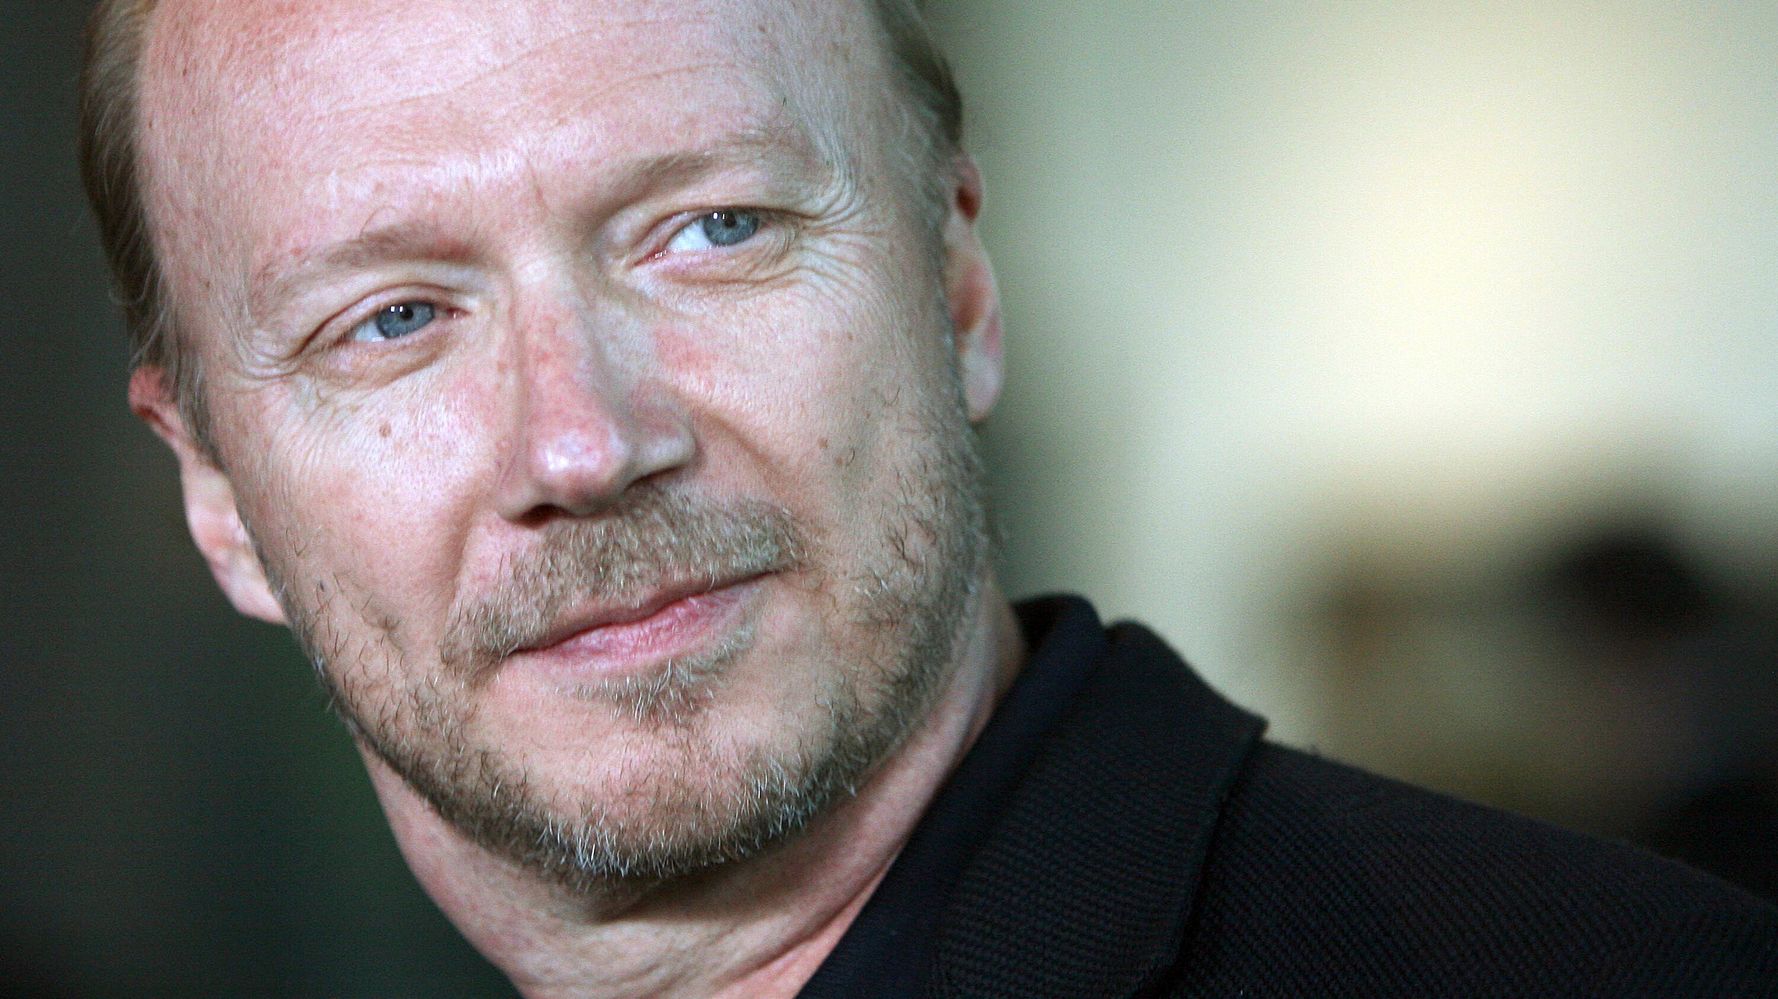 Judge In Italy Reportedly Extends Hotel Detention For Film Director Paul Haggis